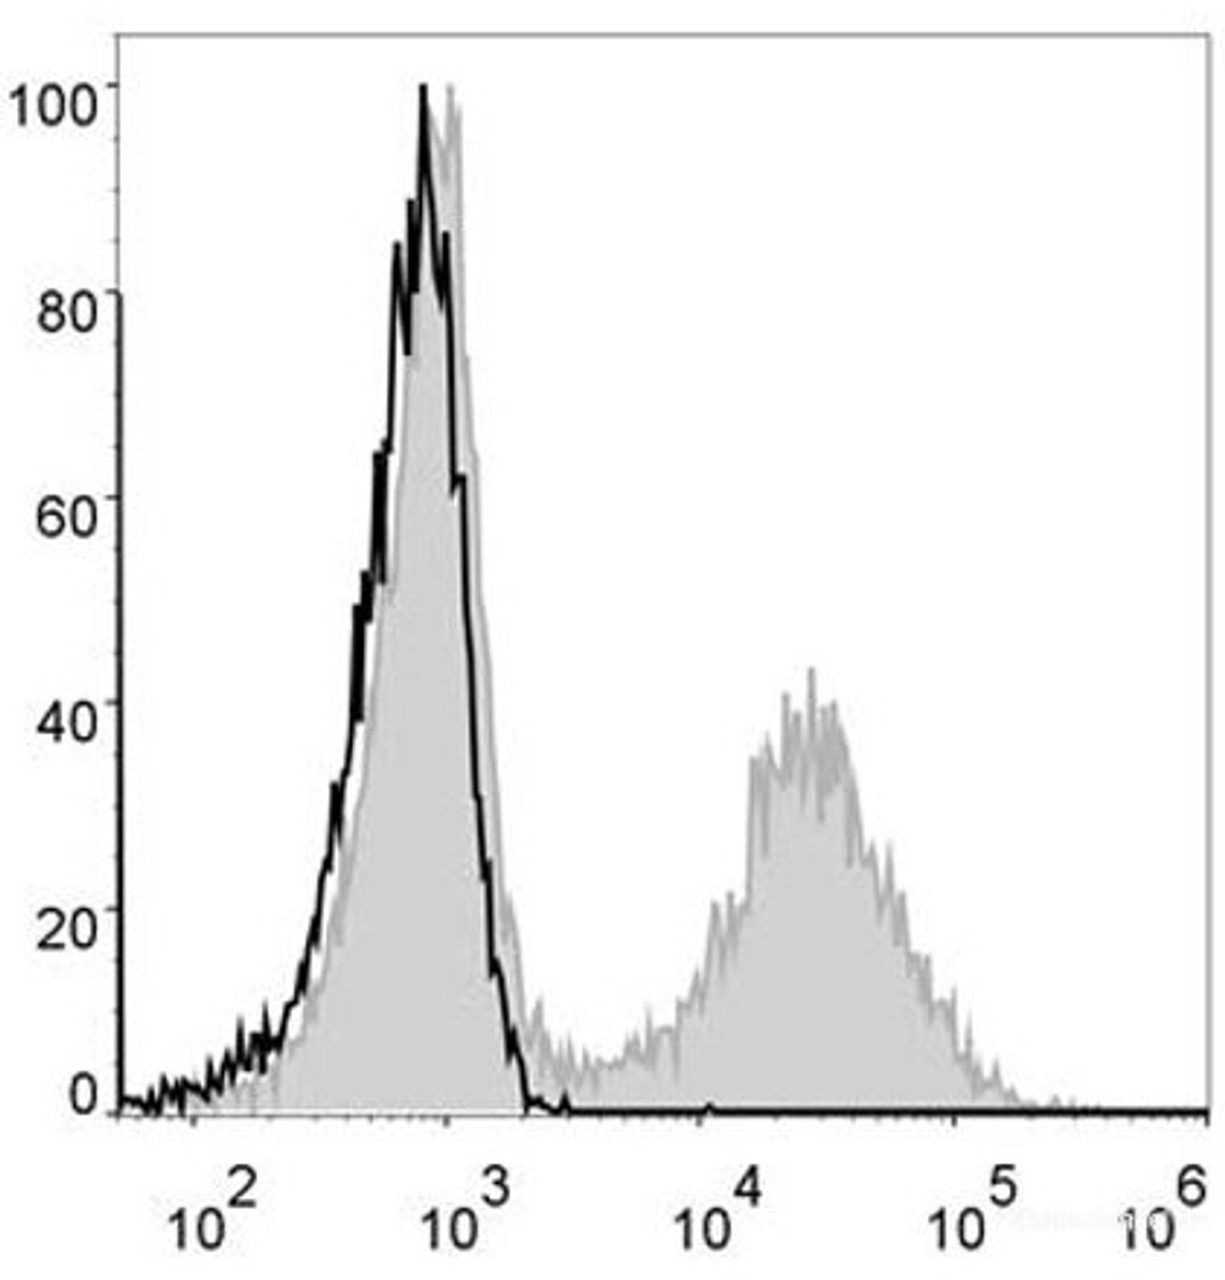 Mouse splenocytes are stained with AF488 Anti-Mouse MHC II (I-A/I-E) Antibody[Used at .2 μg/1<sup>6</sup> cells dilution](filled gray histogram). Unstained splenocytes (blank black histogram) are used as control.